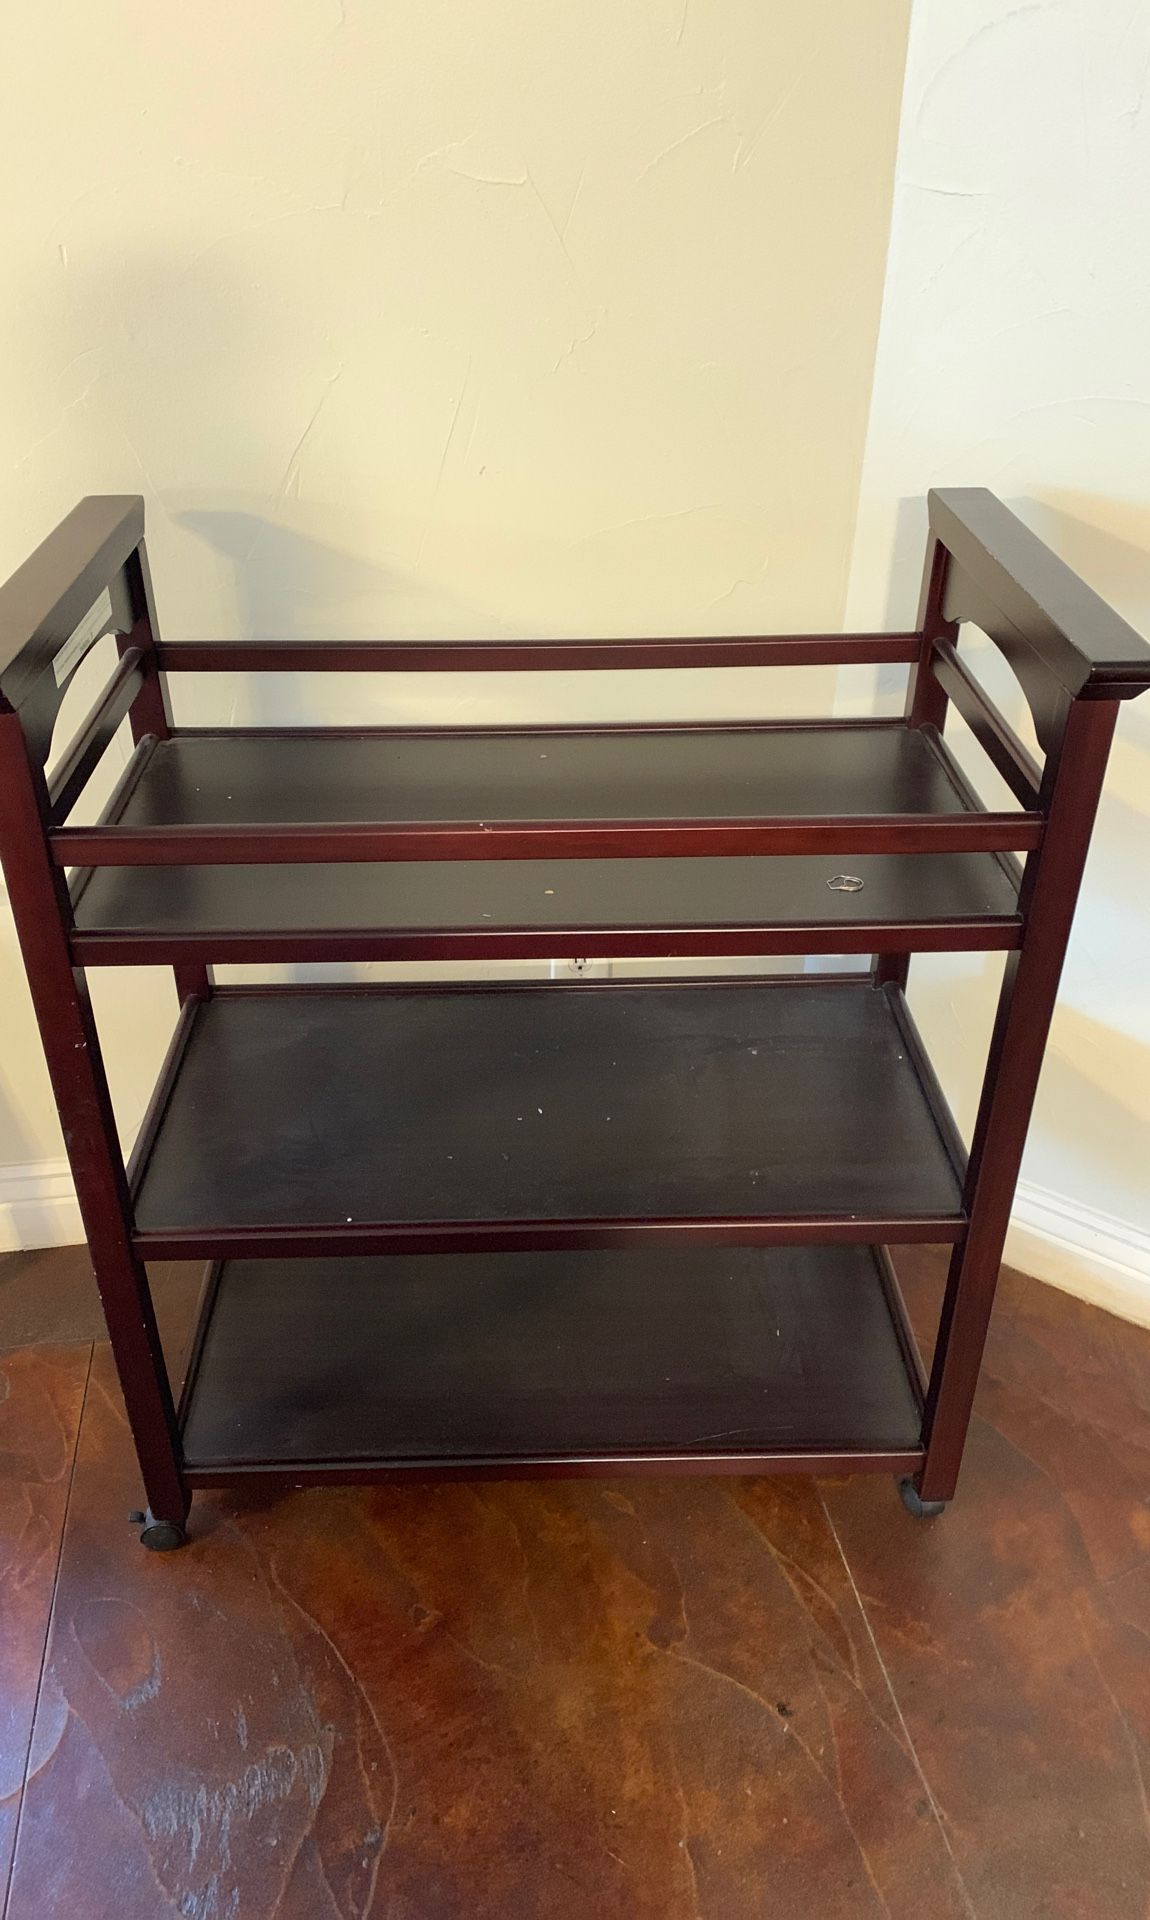 Mobile Changing Table